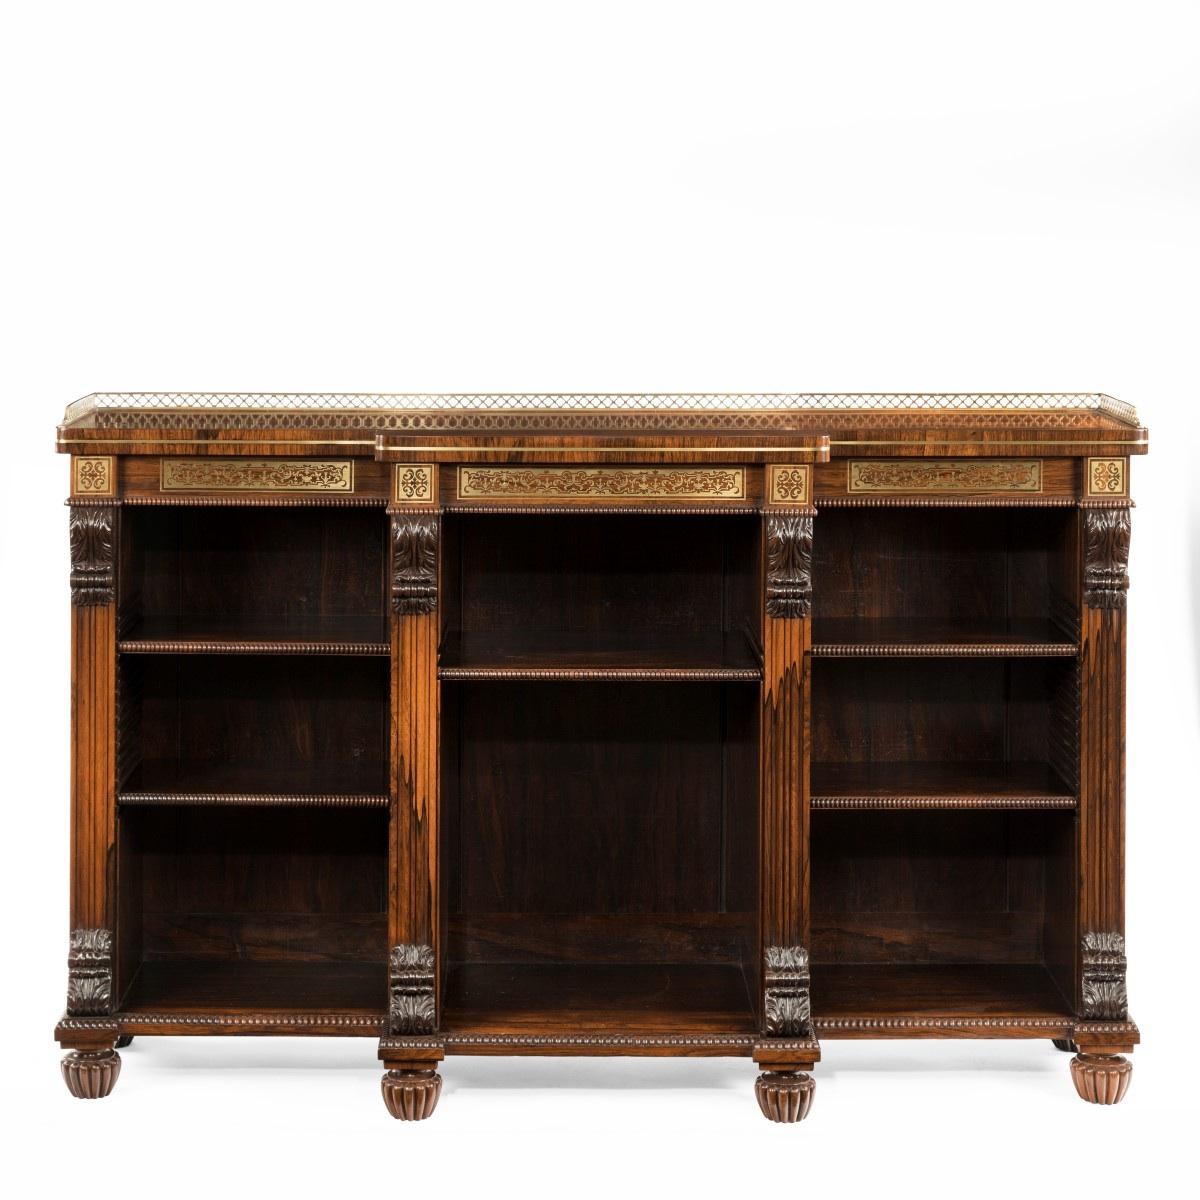 A Regency rosewood breakfront open bookcase attributed to Gillows the shaped top with a brass gallery above a contre-partie boulle-work frieze and four fluted pilasters and three alcoves for five shelves, decorated with brass stringing, solid